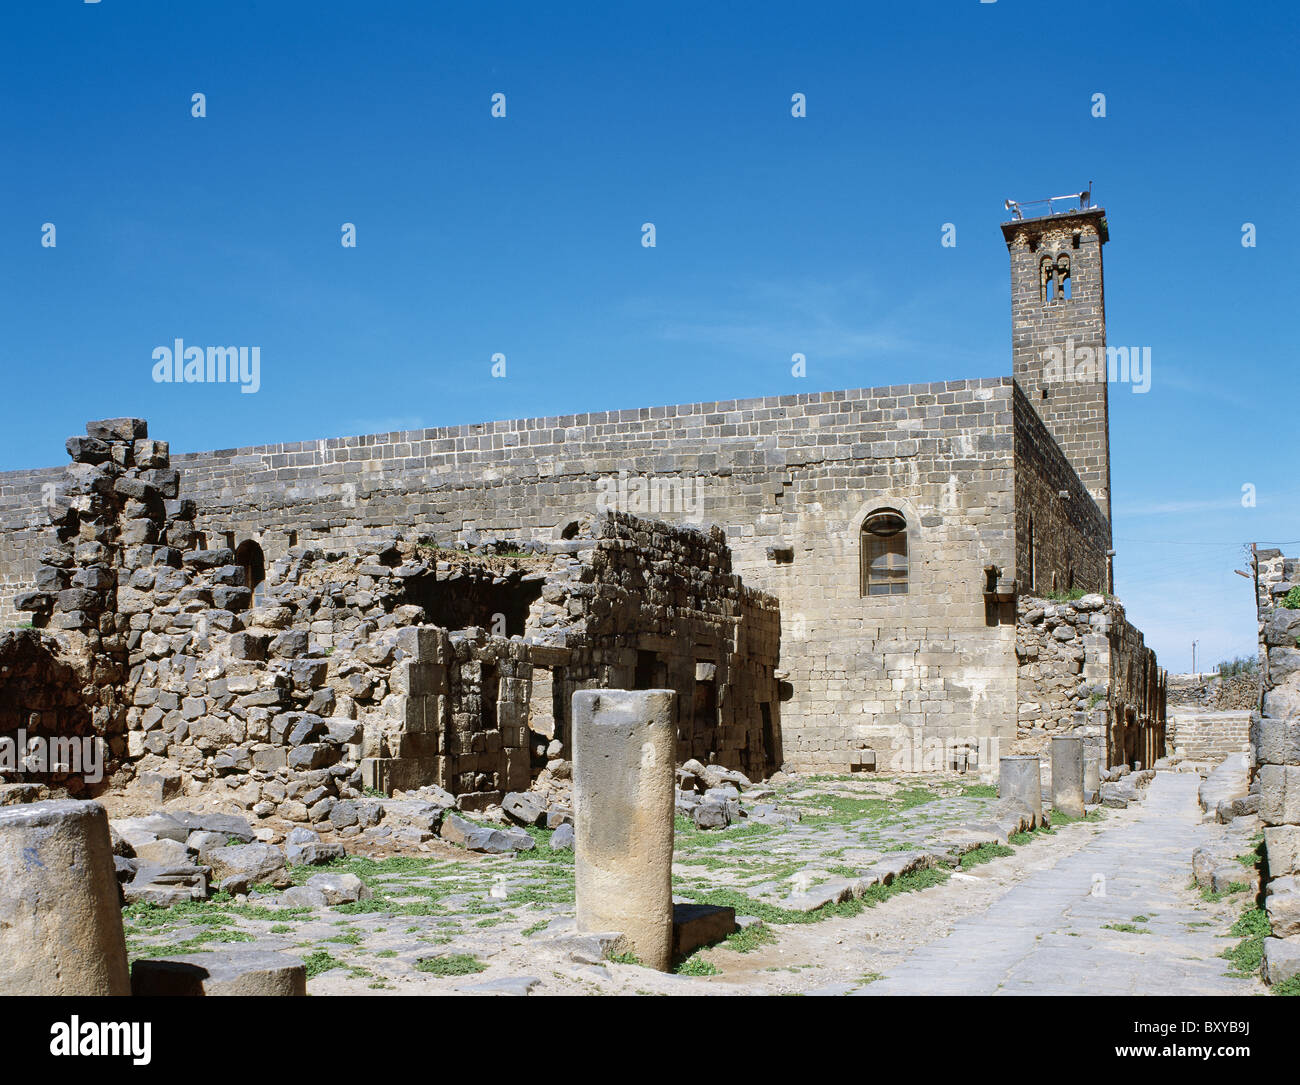 Syria. Bosra. Al-Omari Mosque. Early eighth century. Rebuilt between 12th and 13th centuries. Exterior view. Stock Photo